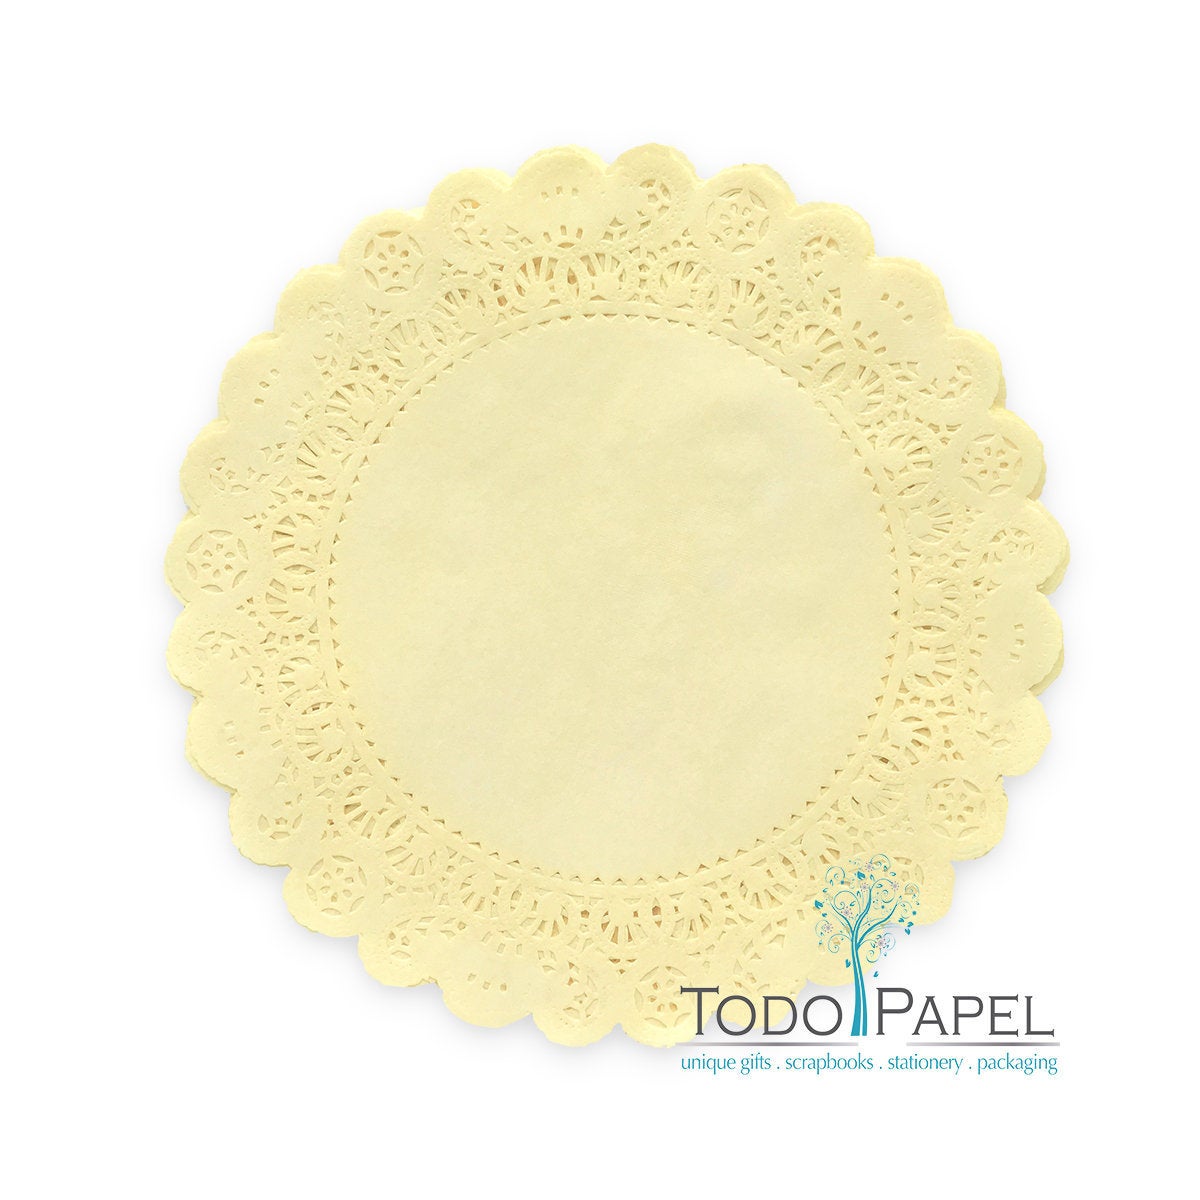 50 Pack 12 Inch Normandy Style Moonlight Yellow Paper Lace Doilies - Great As Table Décor Plate Chargers, Placemats, And Centerpieces For